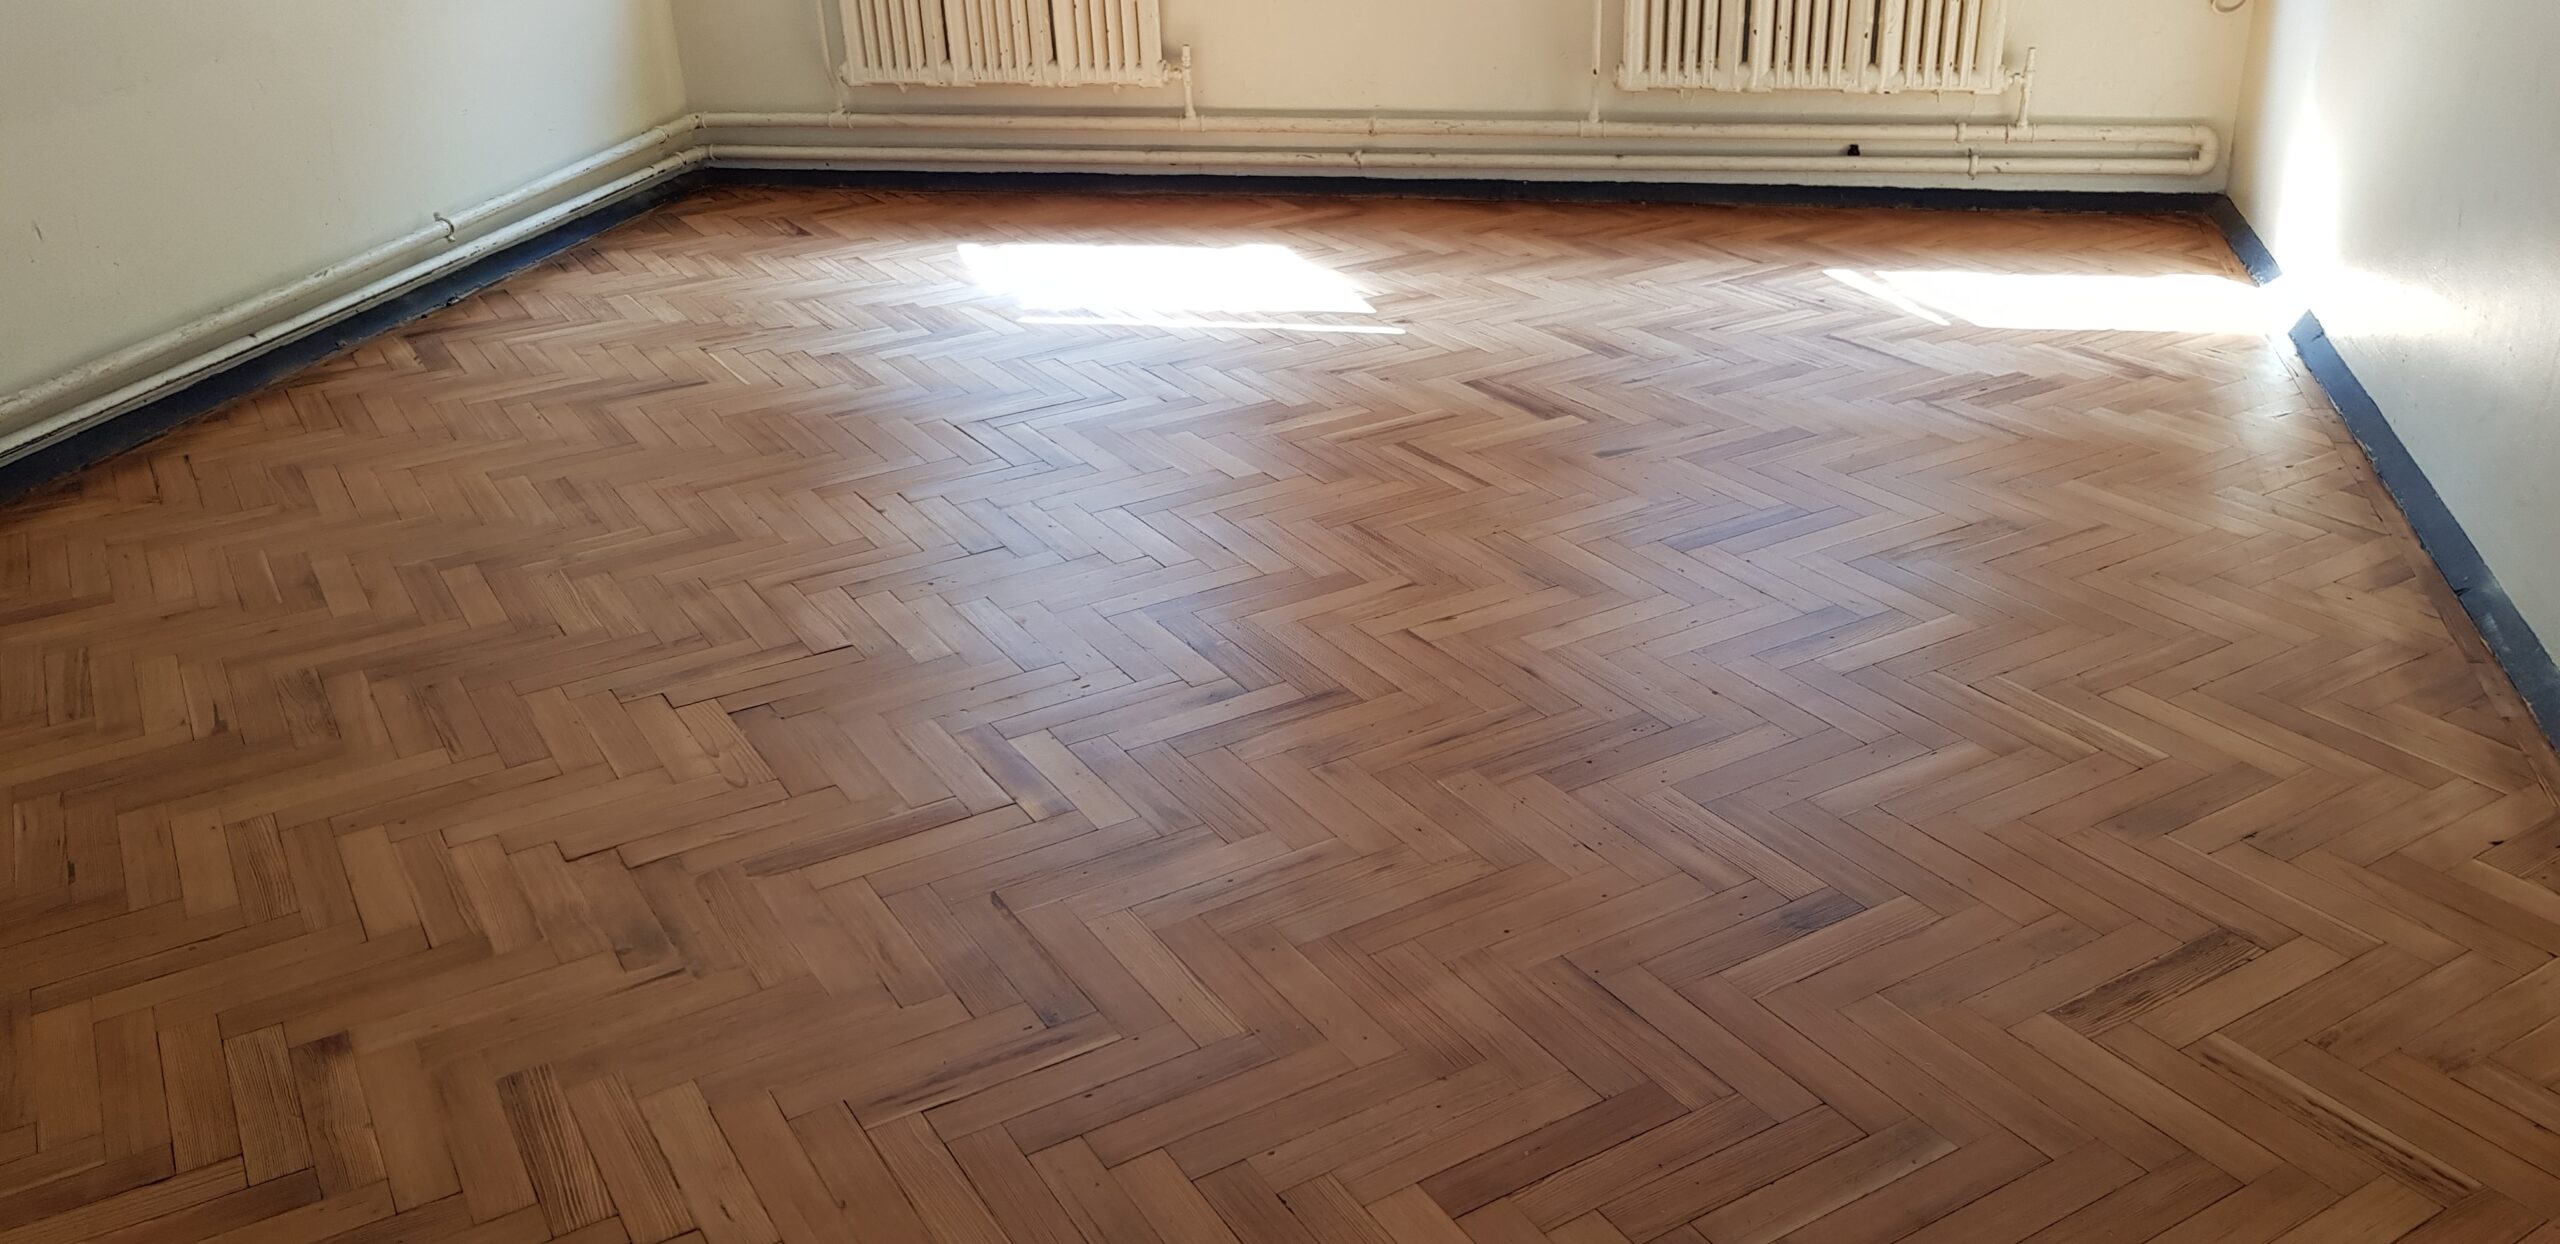 completed finished parquet flooring